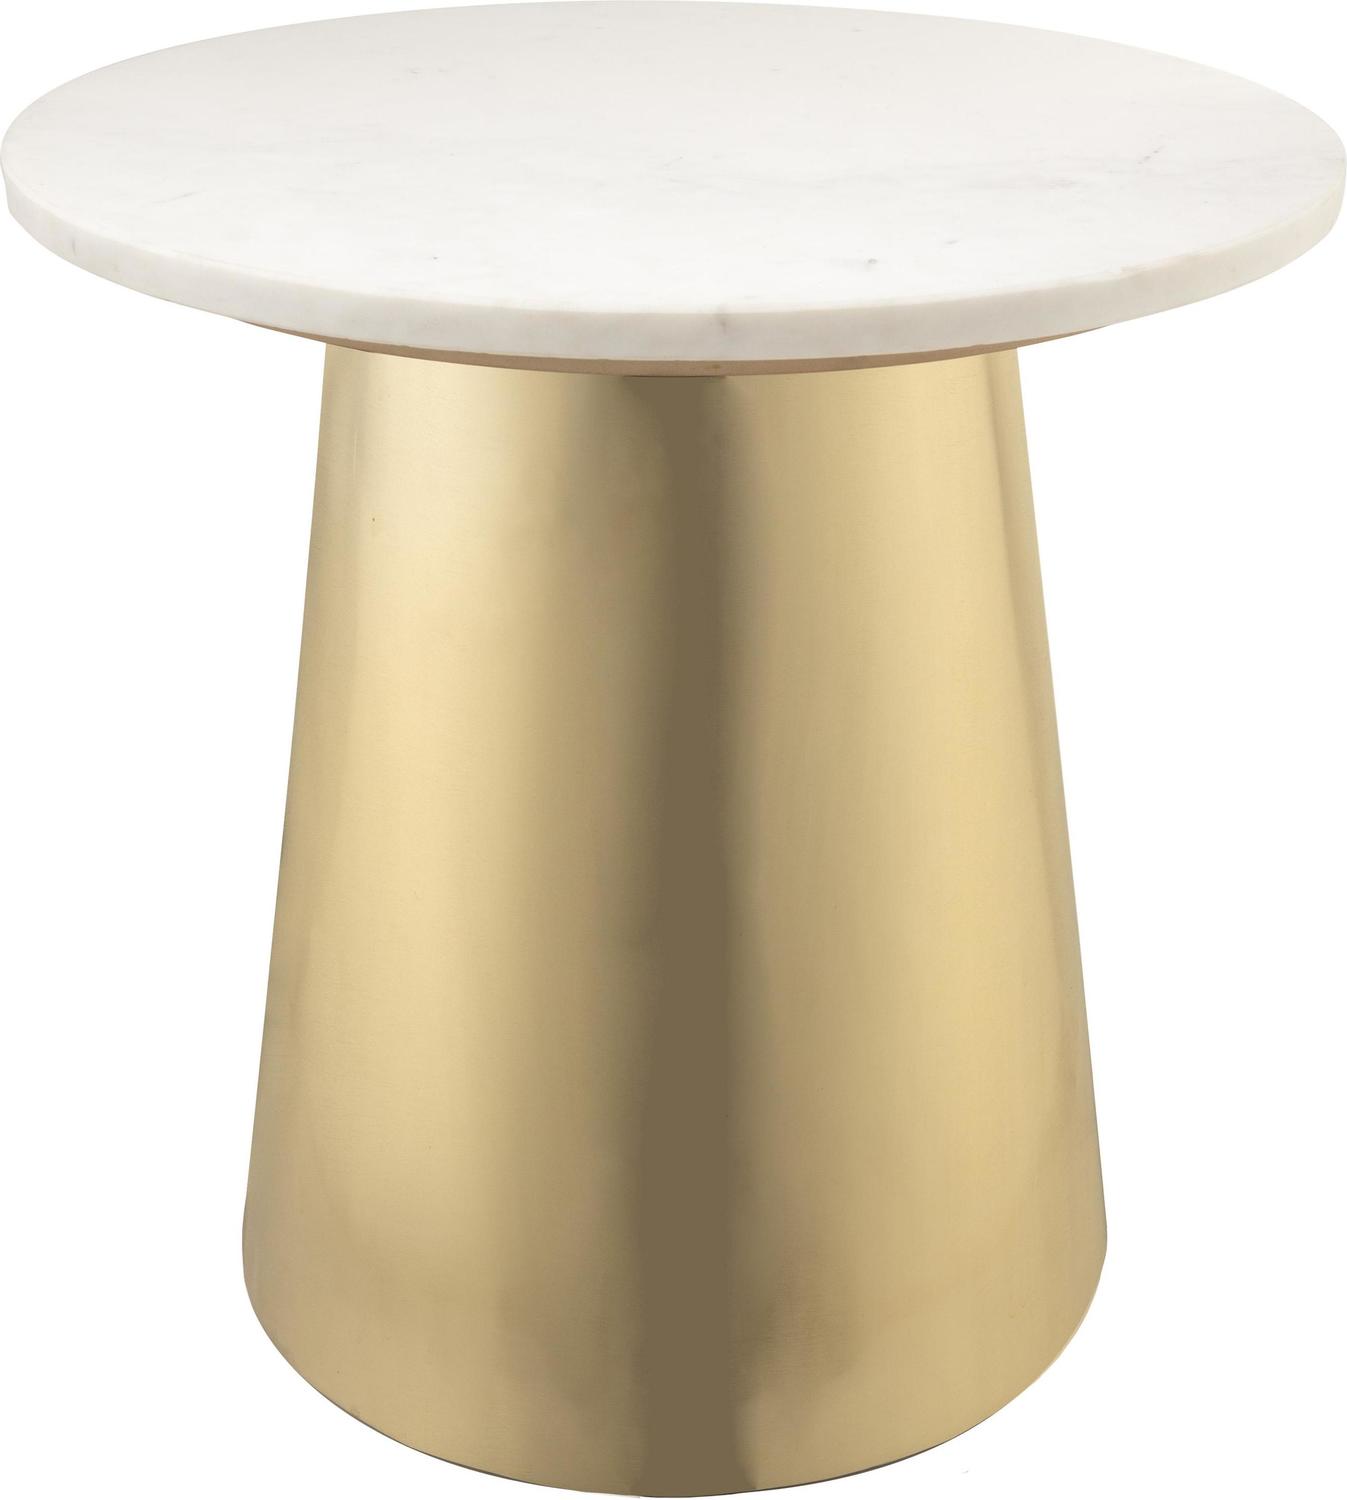 Tov Furniture Side Tables Accent Tables Gold,White Marble